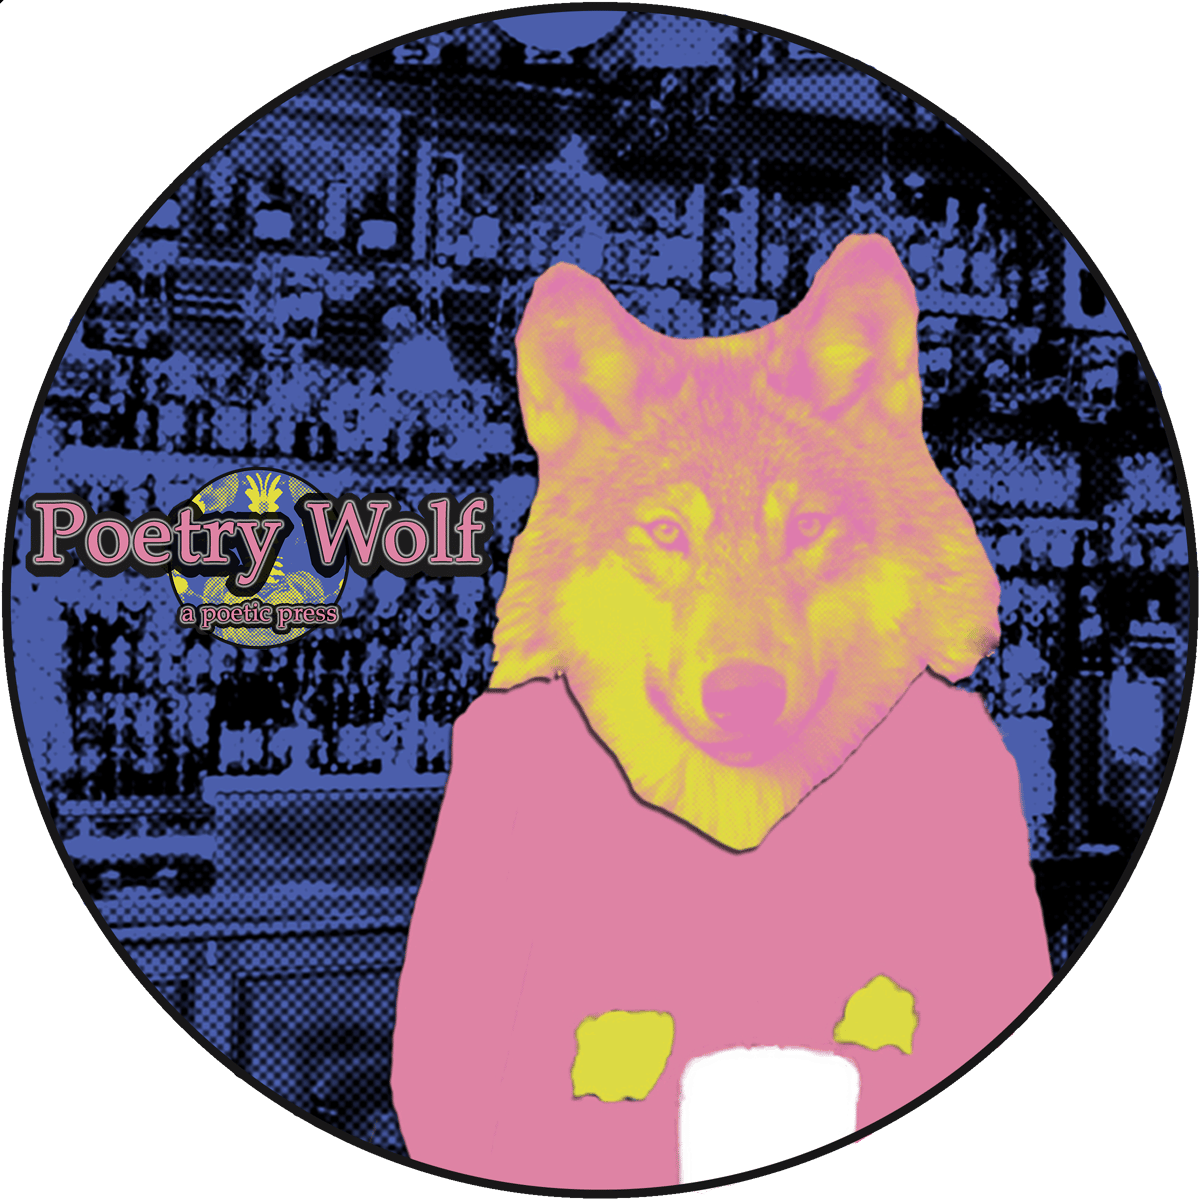 Poetry Wolf Press